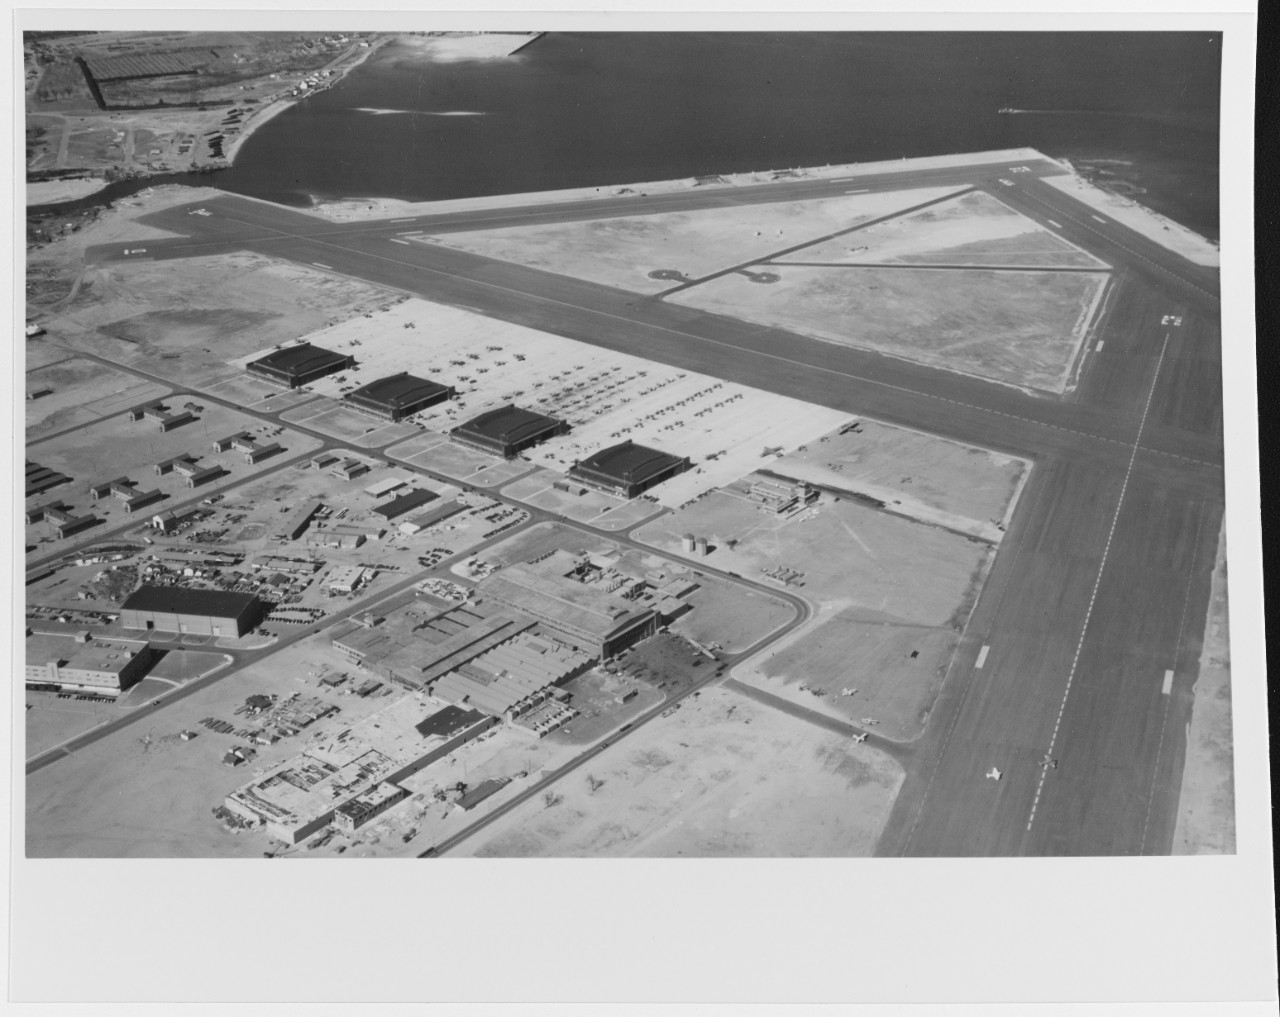 Naval Air Station (NAS) Quonset Point, Rhode Island